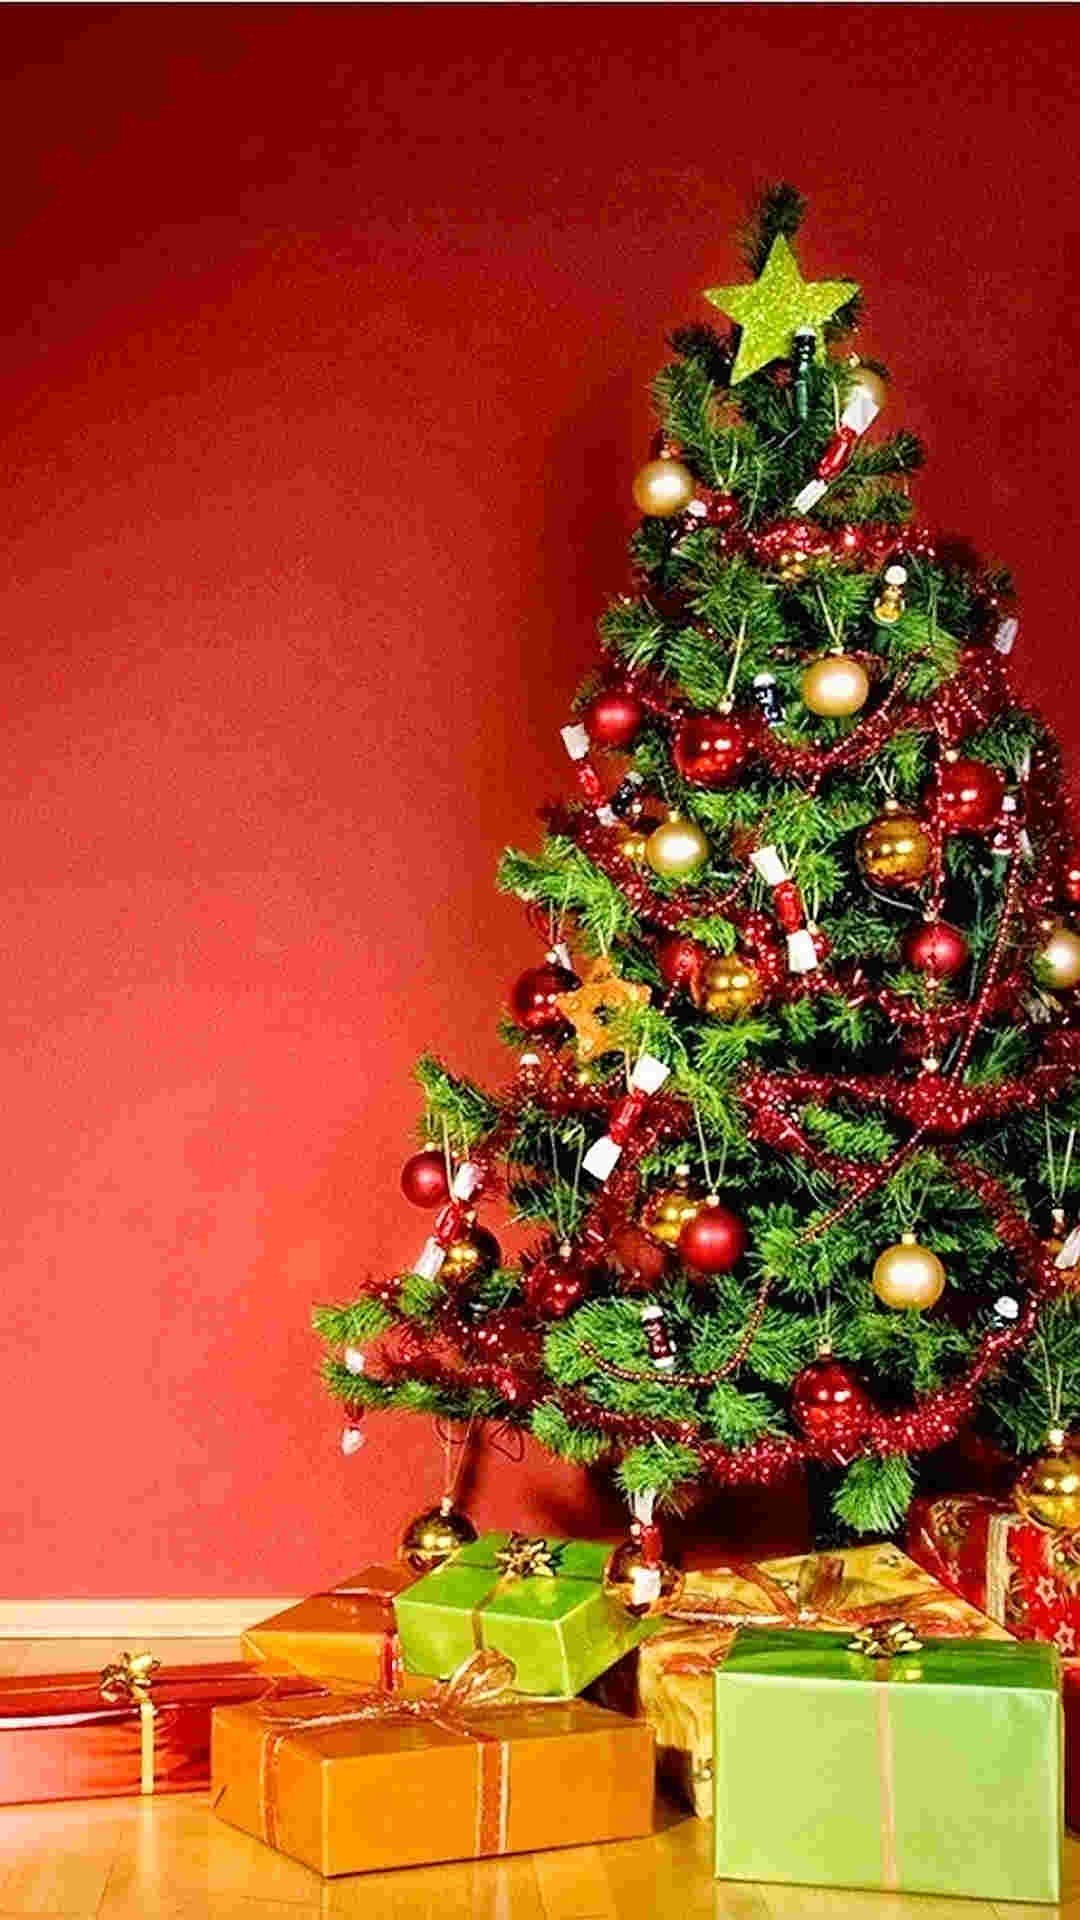 1080x1920 2014 Best gifts and Christmas tree iPhone 6 plus wallpaper #2014 #Christmas  #tree